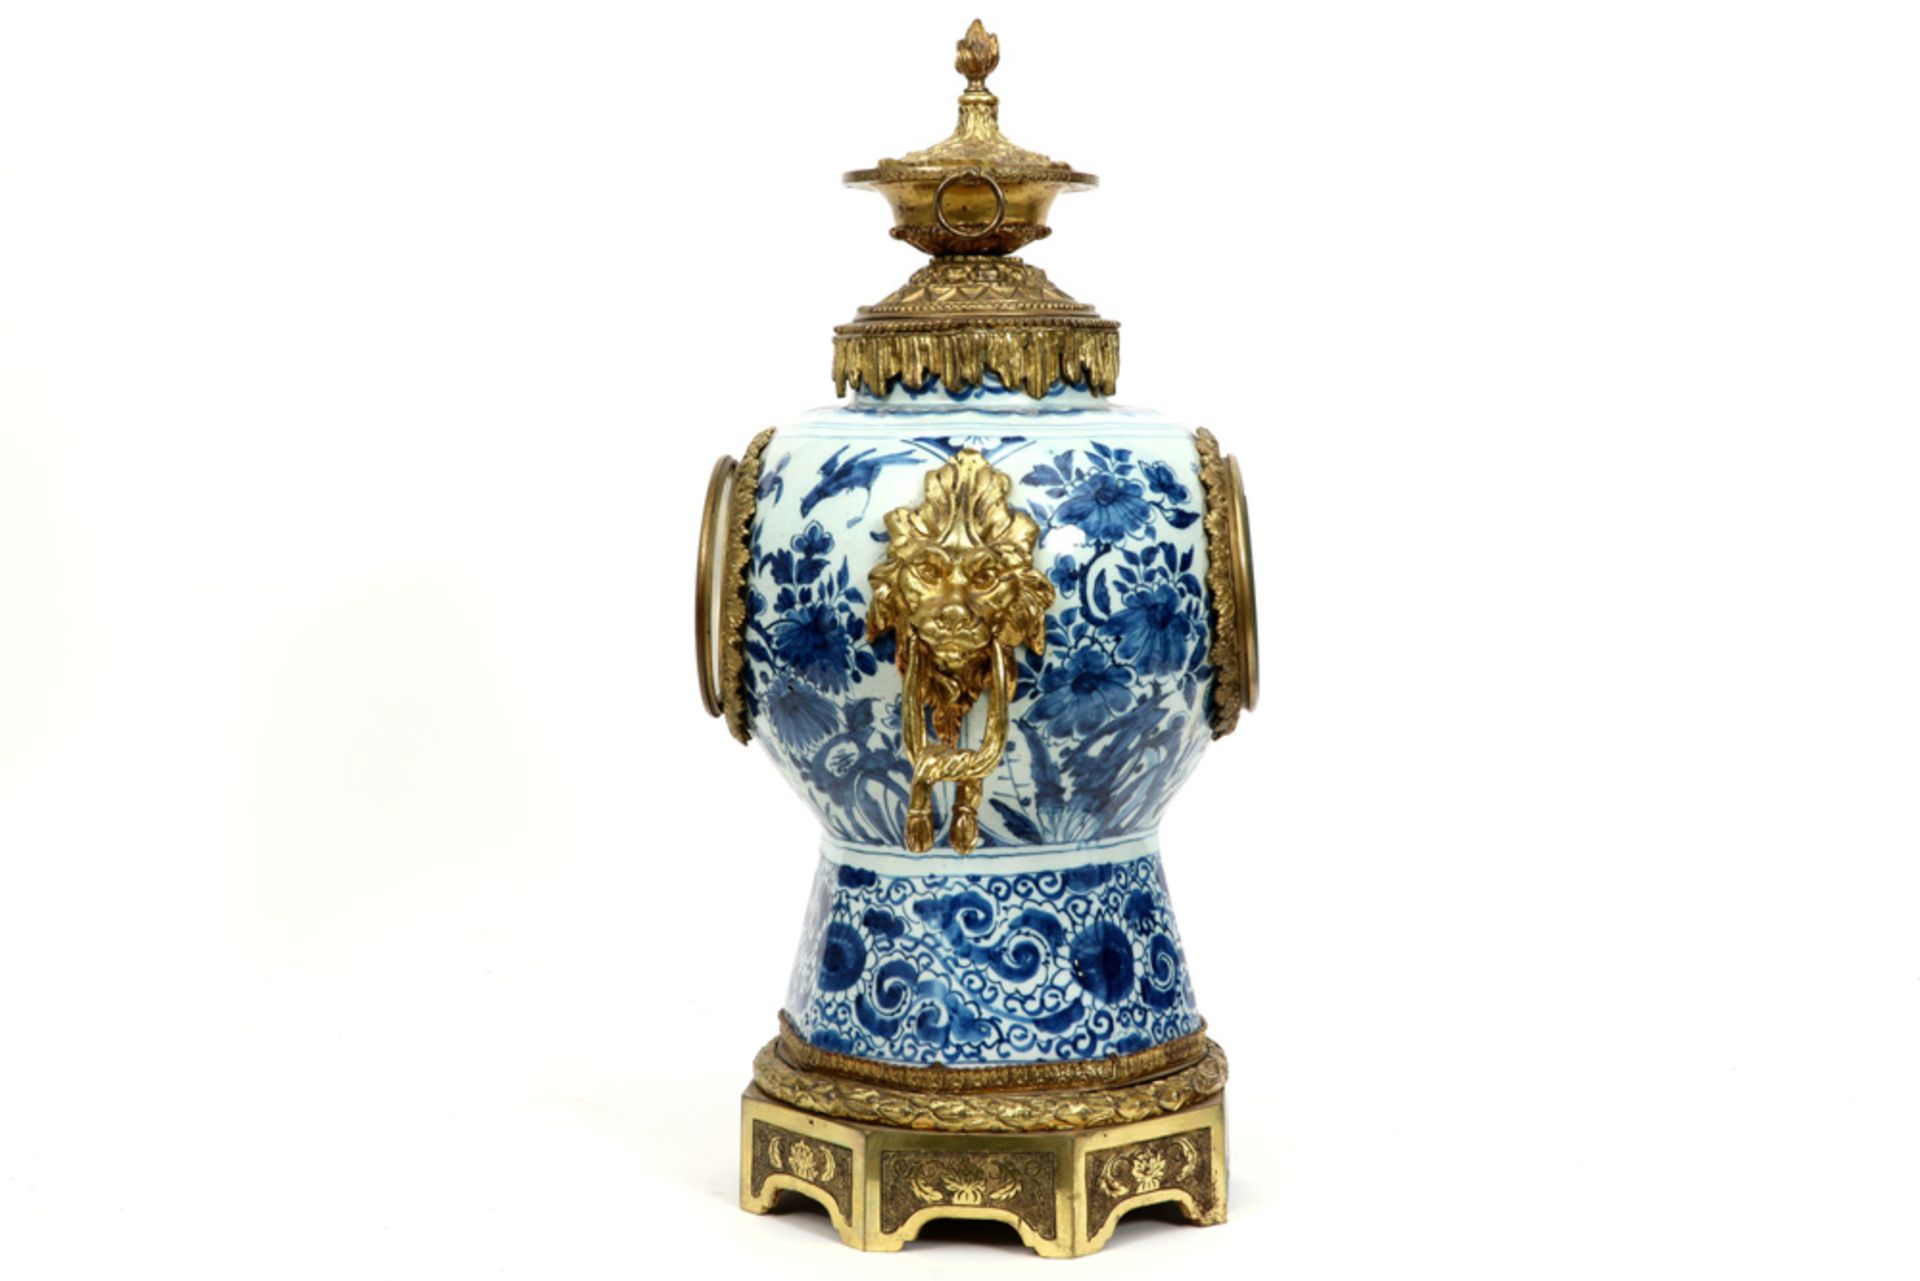 19th Cent. clock with an 18th Cent. Delft ceramic vase with blue-white decor and with mountings in g - Image 2 of 3